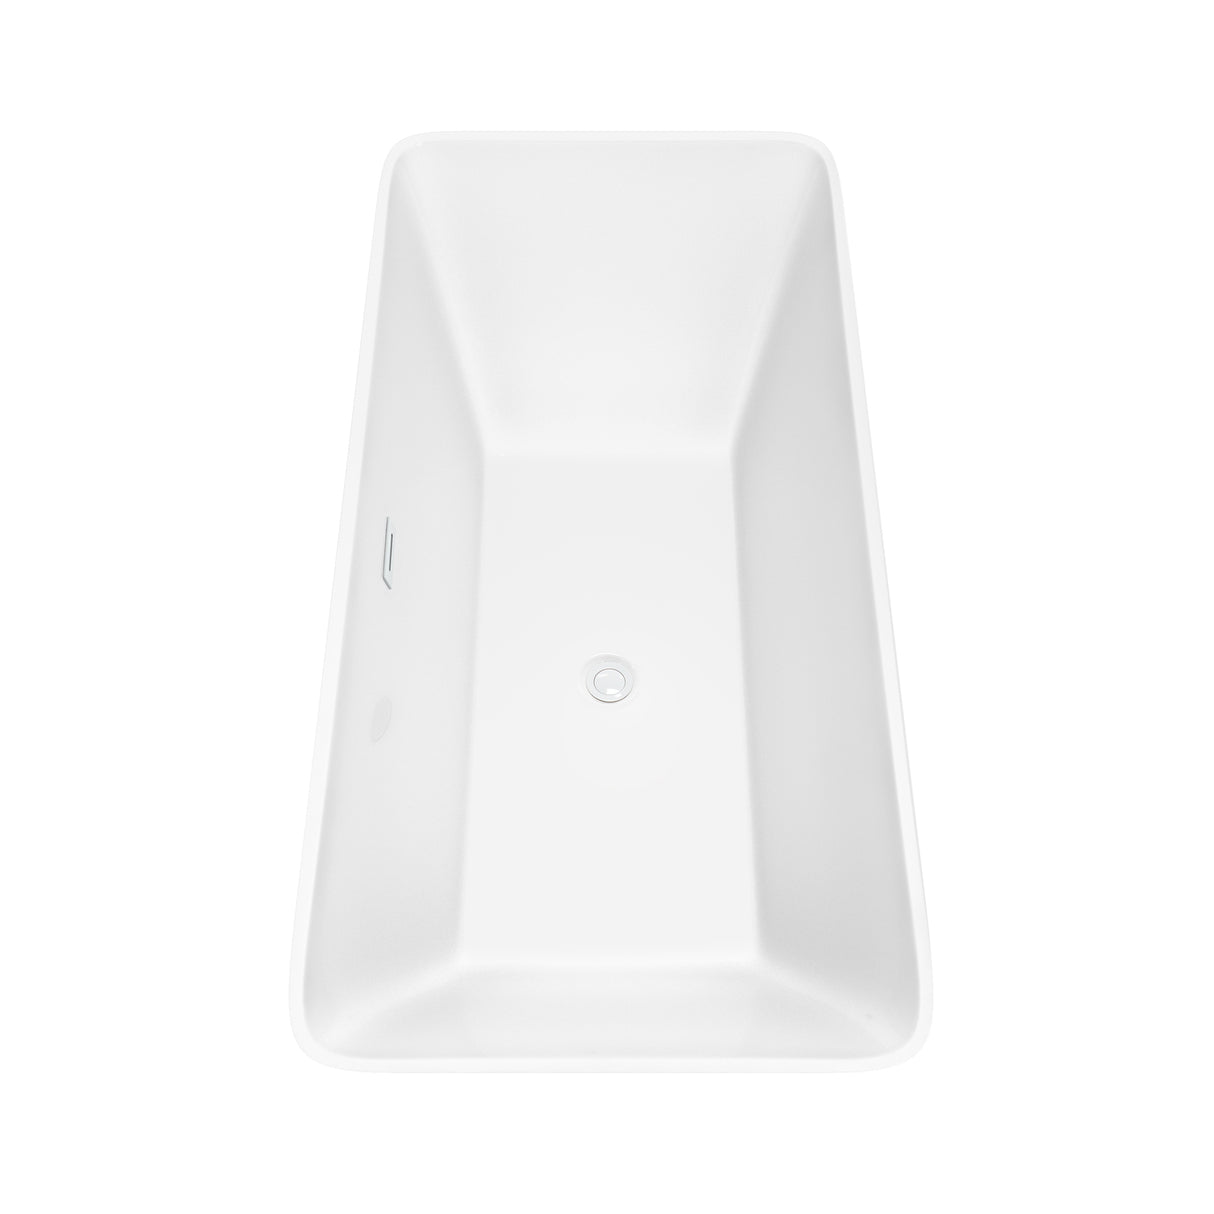 Tiffany 67 Inch Freestanding Bathtub in White with Shiny White Drain and Overflow Trim